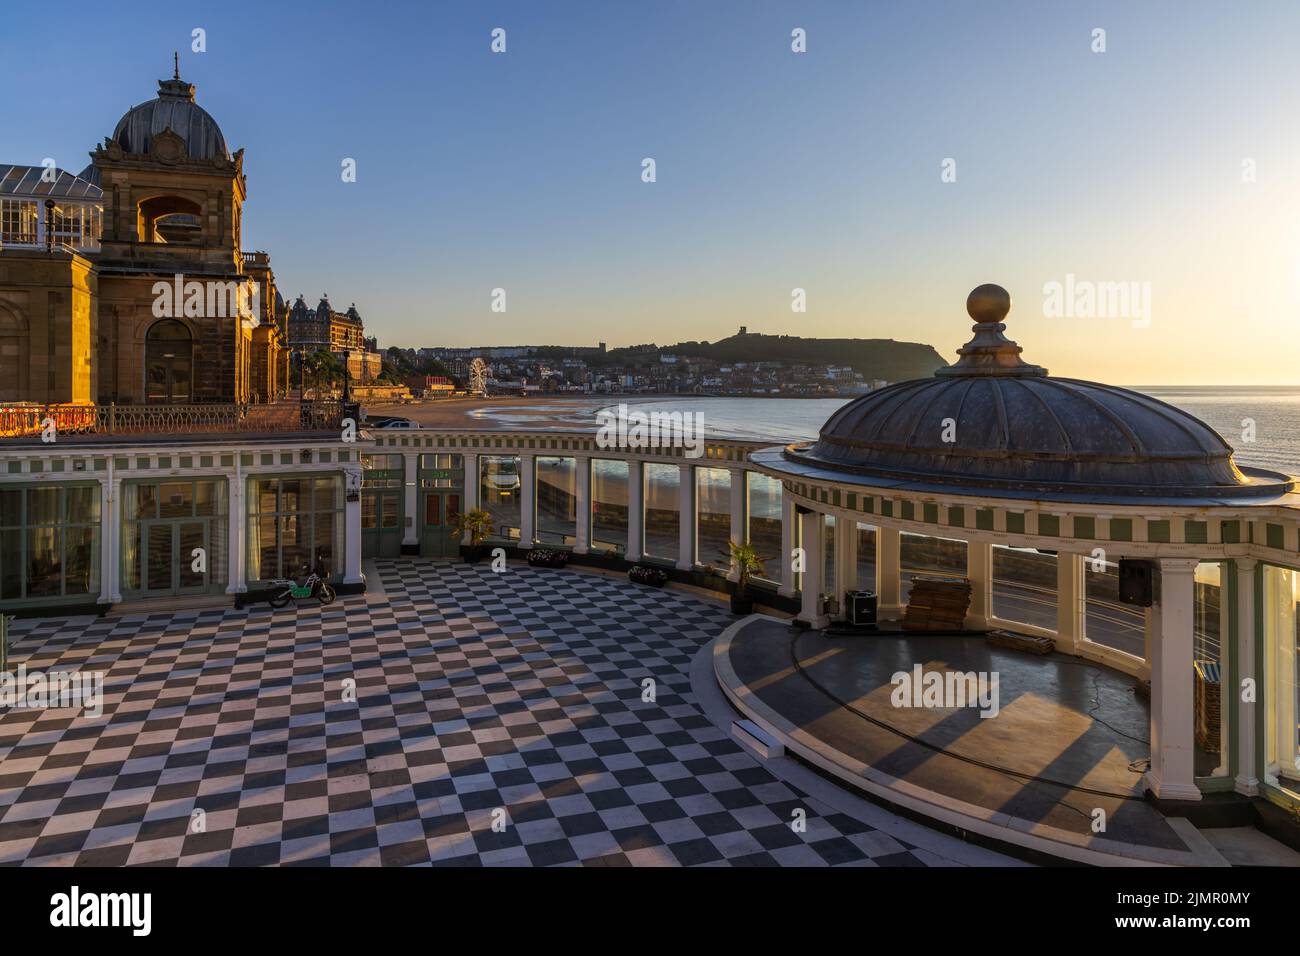 The bandstand at Scarborough Spa Complex, located in Scarborough’s picturesque South Bay on the North Yorkshire coast. Captured just after sunrise. Stock Photo